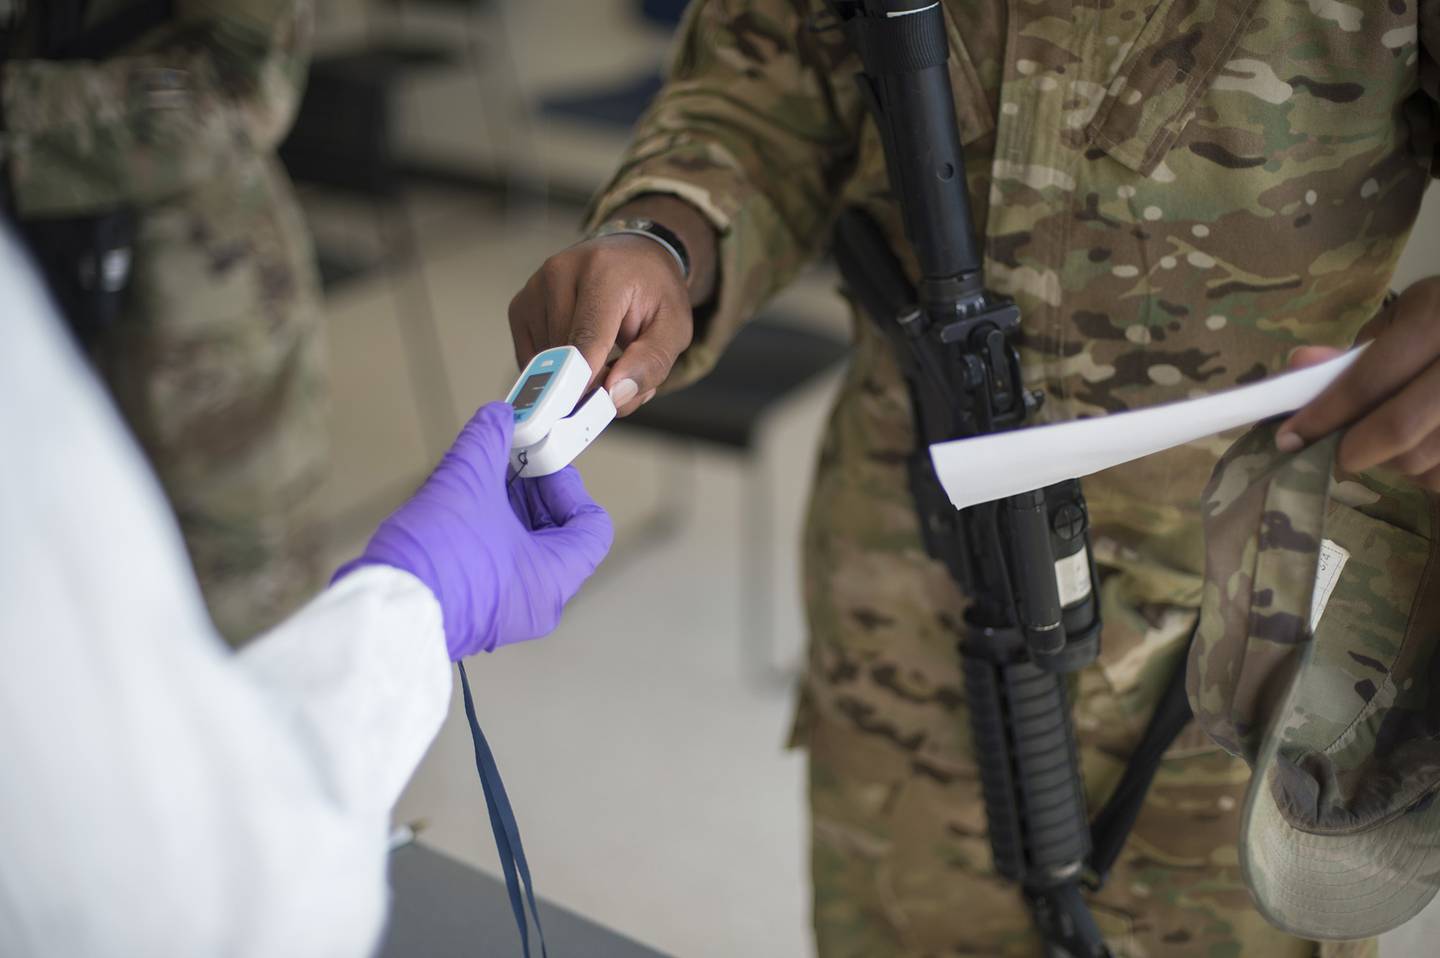 Soldiers attached to the Texas Army National Guard's 36th Infantry Division and 272th Engineer Company receive a COVID-19 IgG, IgM antigen test at Camp Swift in Bastrop, Texas, on June 9, 2020.